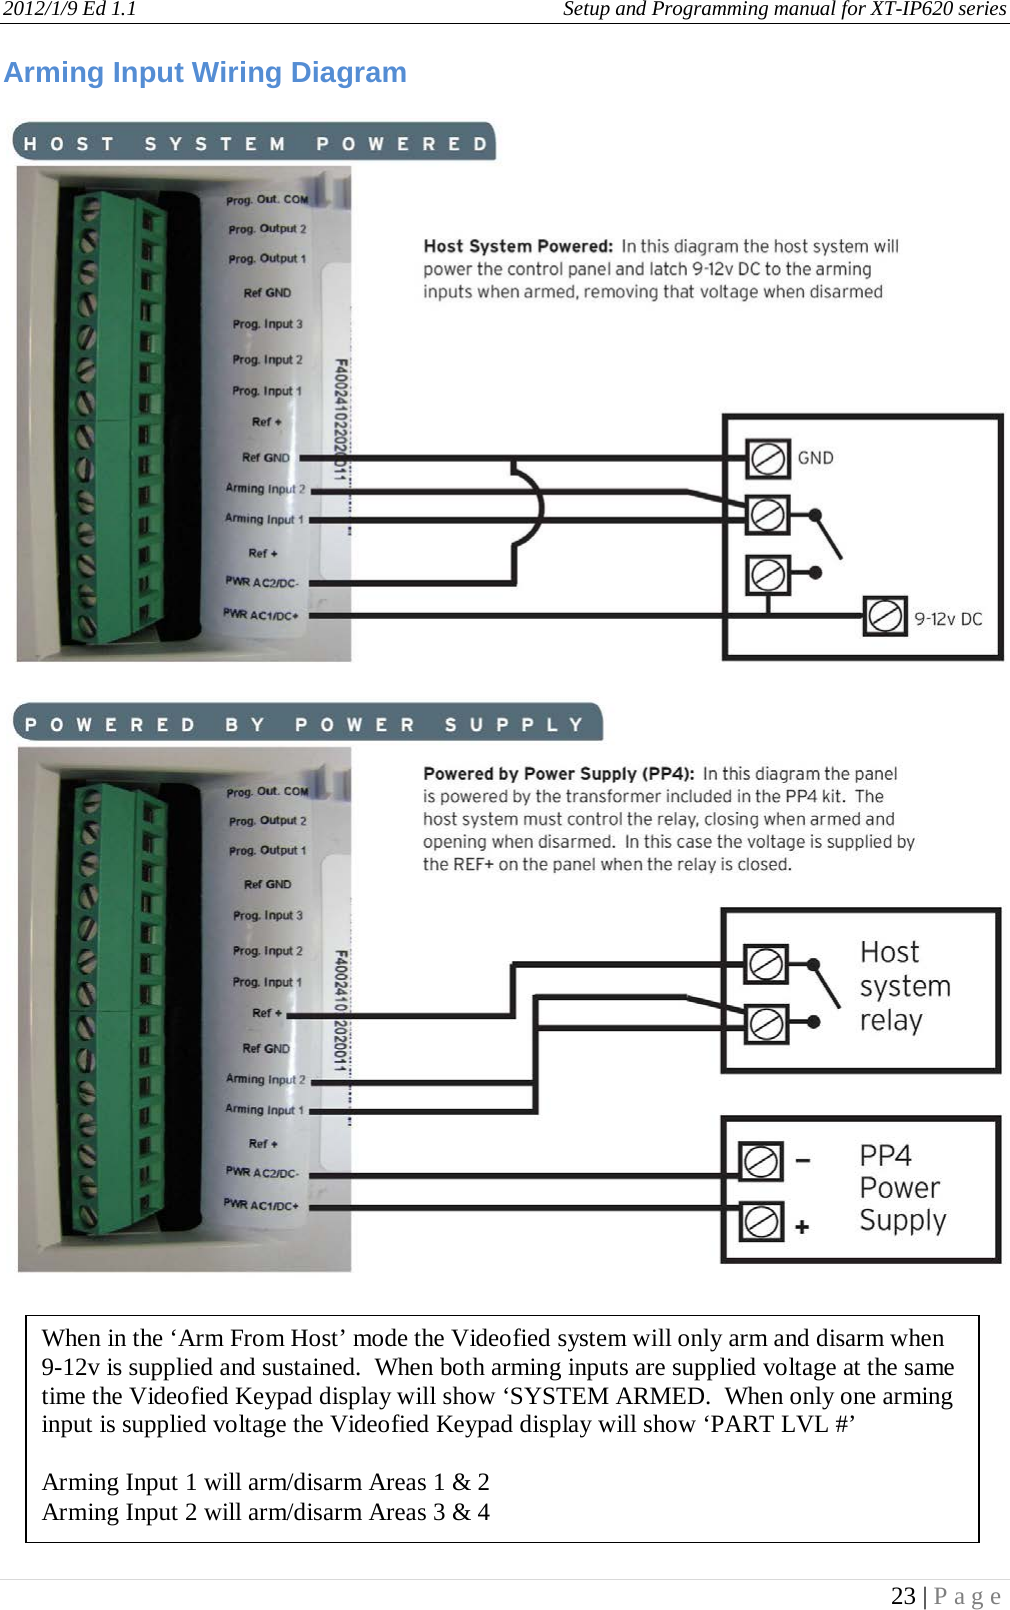 2012/1/9 Ed 1.1     Setup and Programming manual for XT-IP620 series   23 | Page  Arming Input Wiring Diagram        When in the ‘Arm From Host’ mode the Videofied system will only arm and disarm when 9-12v is supplied and sustained.  When both arming inputs are supplied voltage at the same time the Videofied Keypad display will show ‘SYSTEM ARMED.  When only one arming input is supplied voltage the Videofied Keypad display will show ‘PART LVL #’   Arming Input 1 will arm/disarm Areas 1 &amp; 2 Arming Input 2 will arm/disarm Areas 3 &amp; 4 